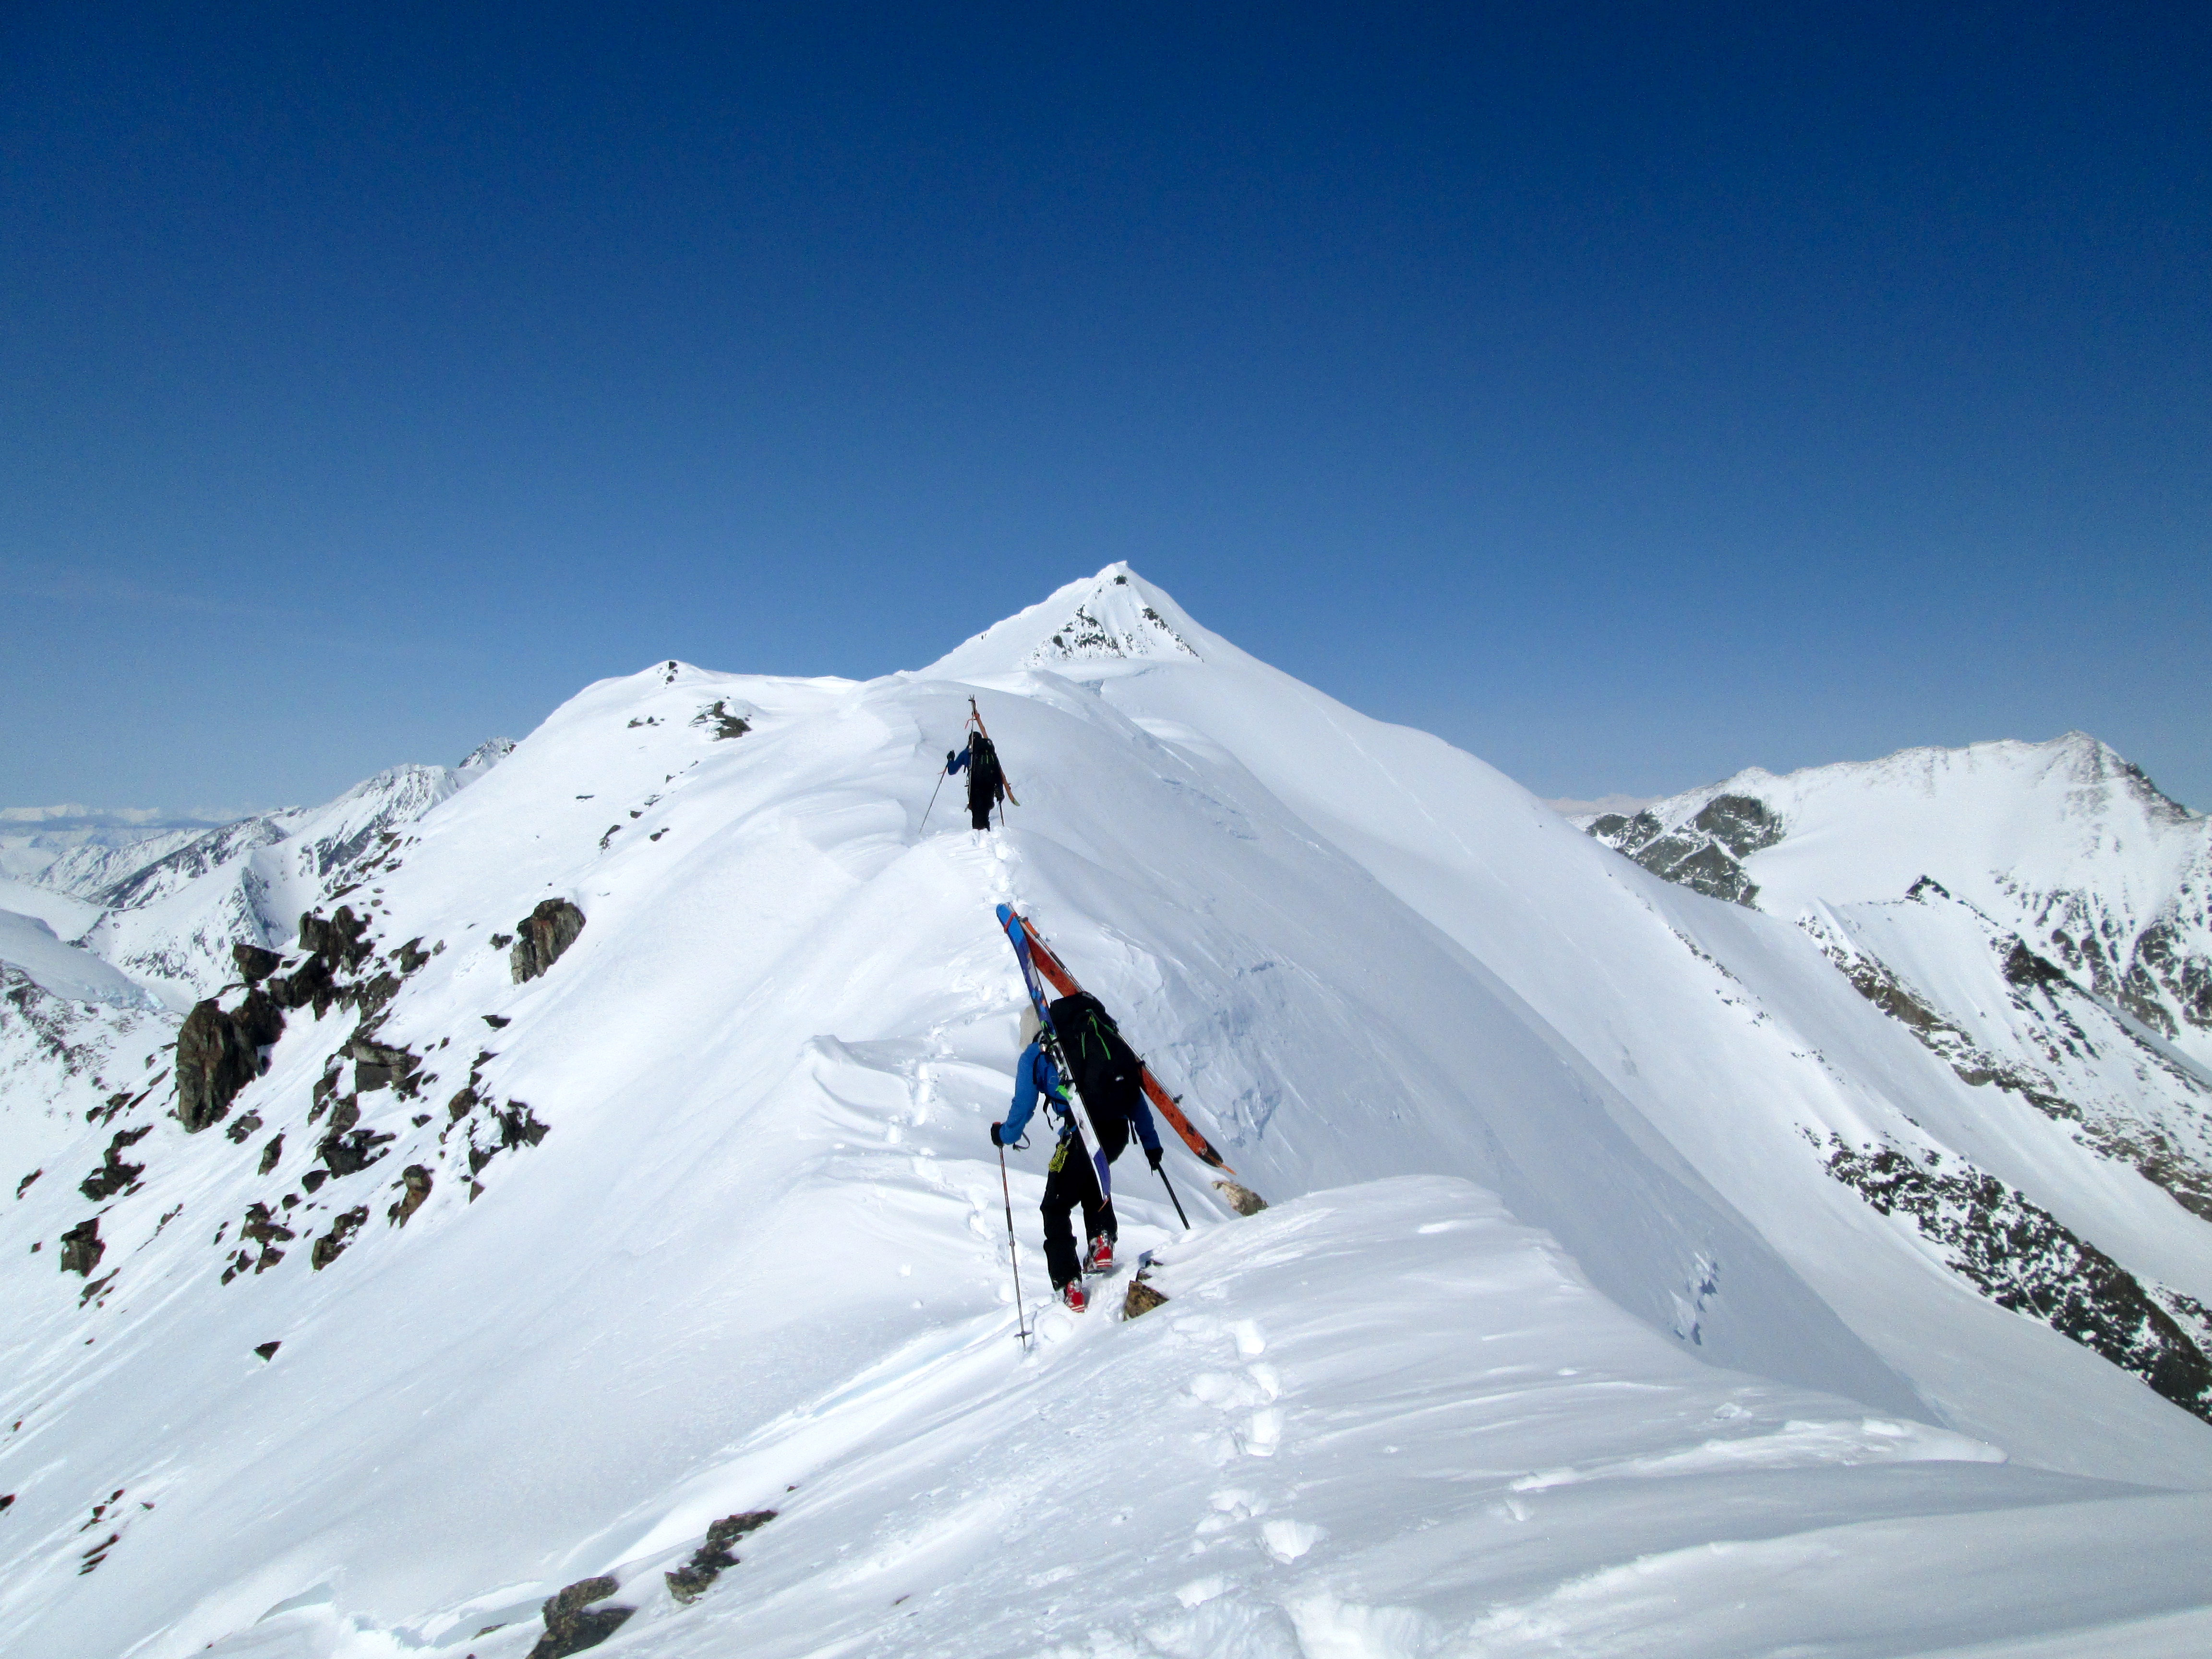 Cool Skiing Pictures Being A Pretty Climb